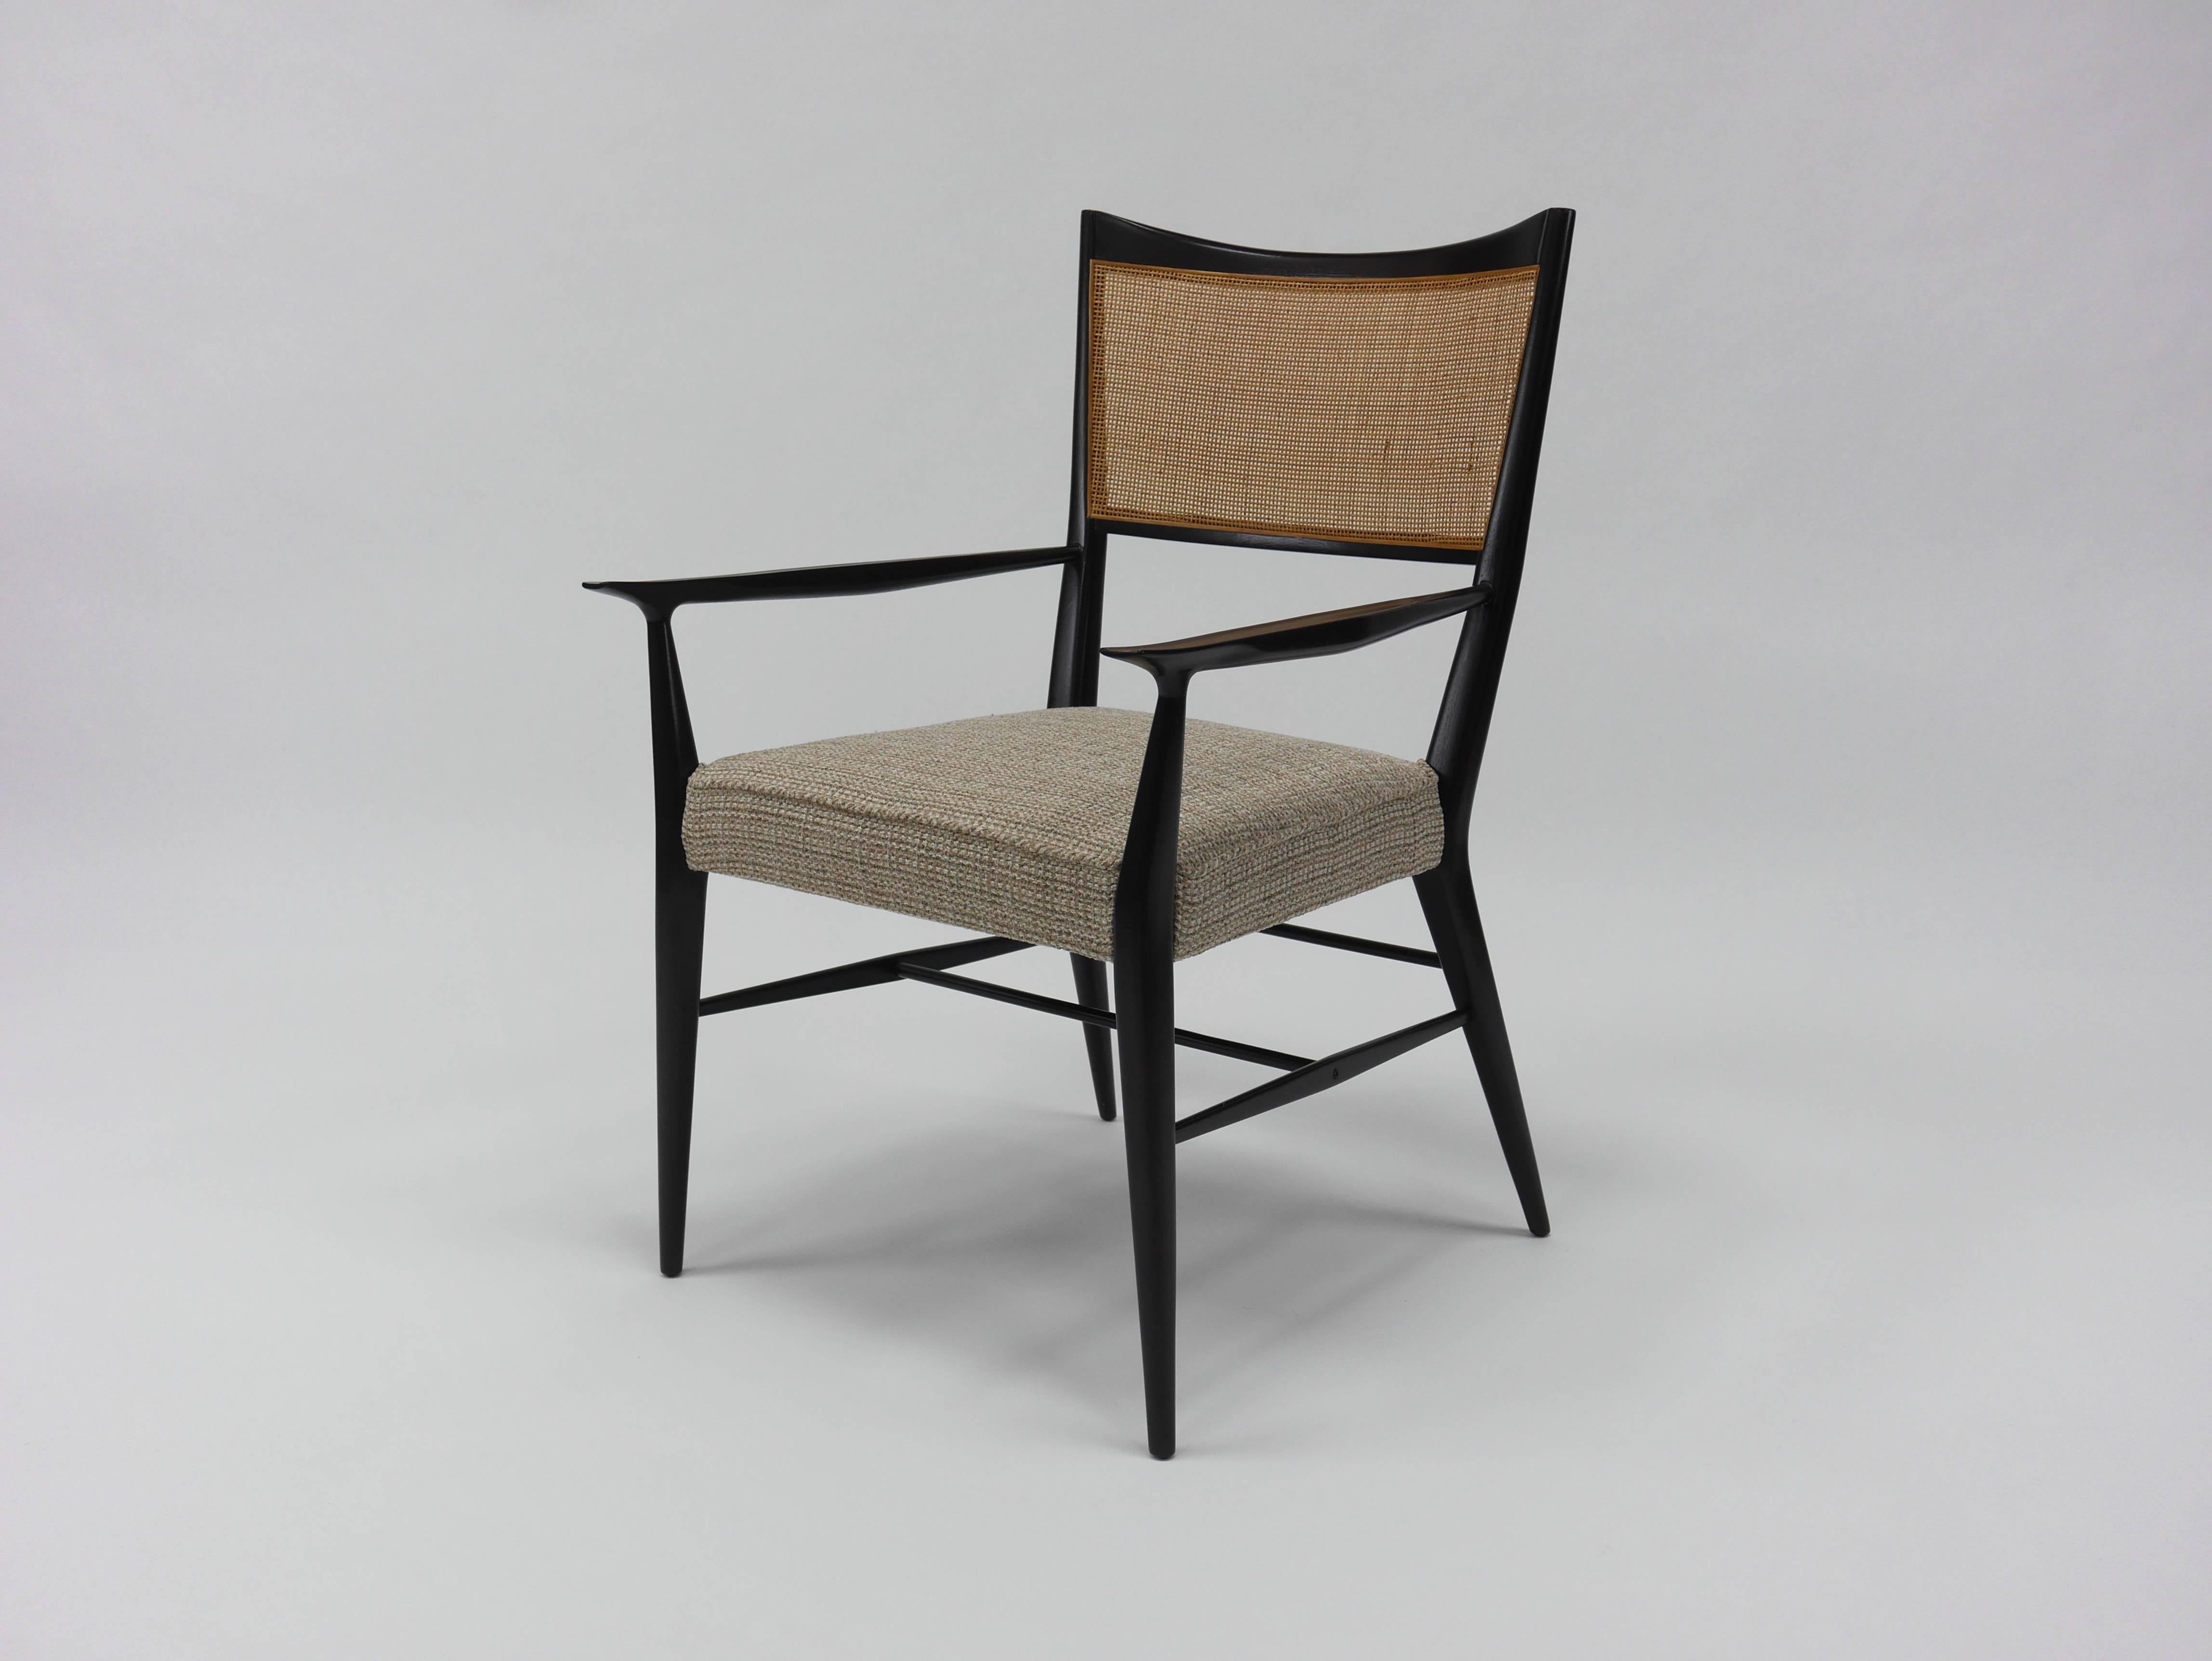 Set of eight Paul McCobb Irwin collection dining chairs with sculpted mahogany frames and caned backs. Six side chairs, two armchairs. Refinished and re caned. Upholstery shown is for reference only, chairs are stripped and ready for client's